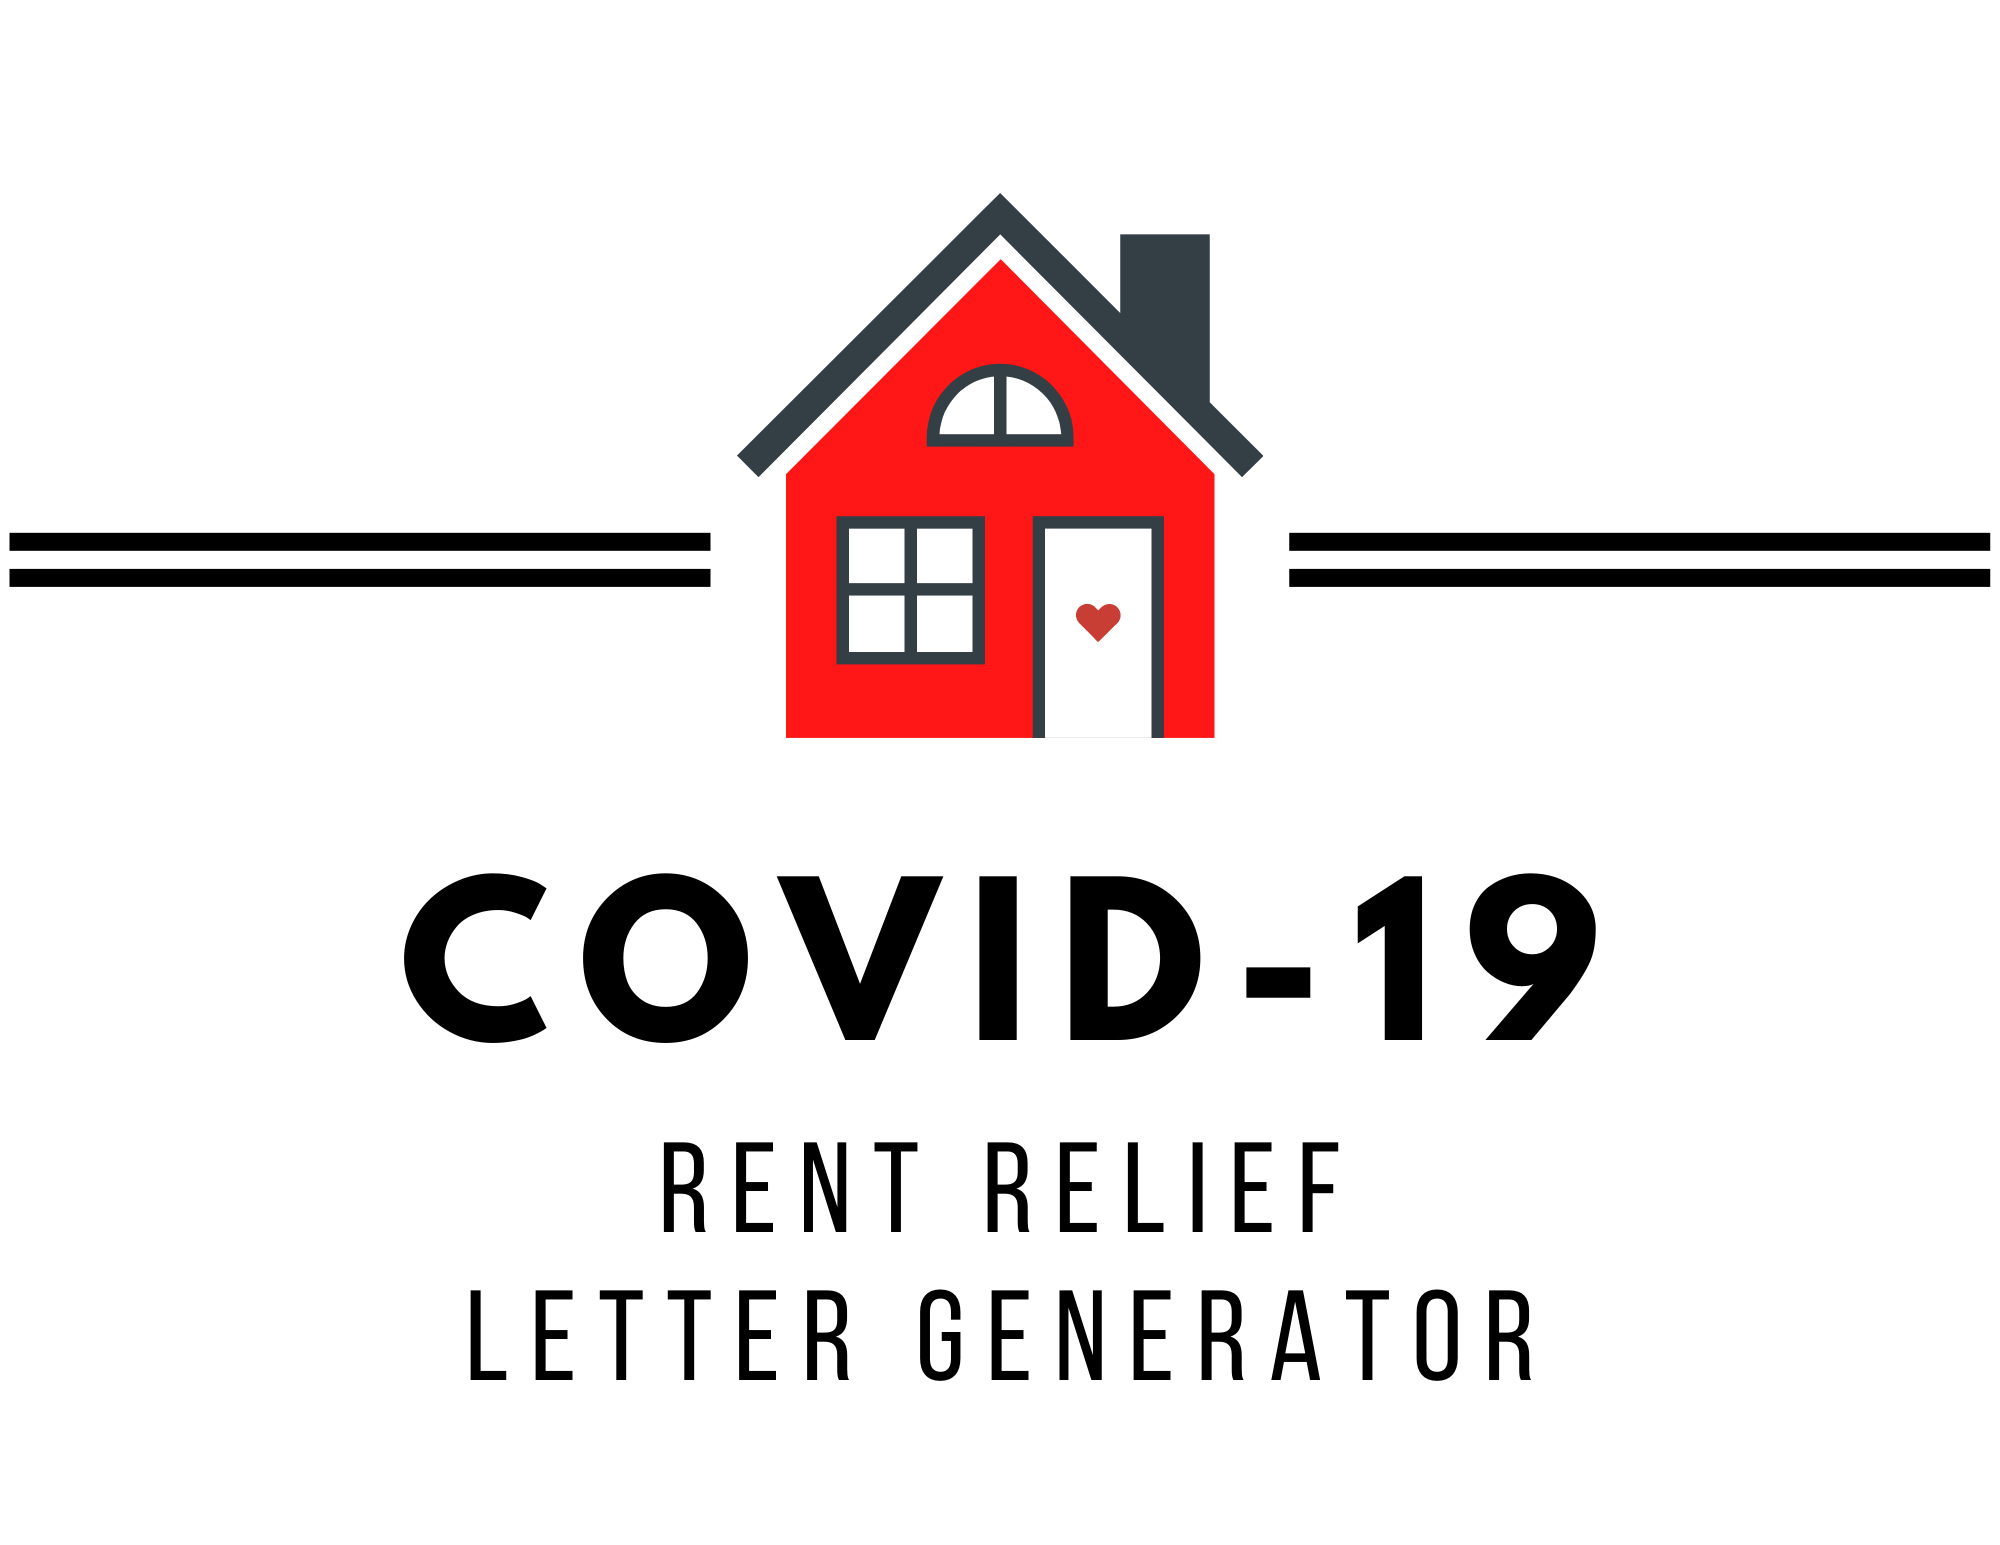 COIVD-19 Rent Relief Letter